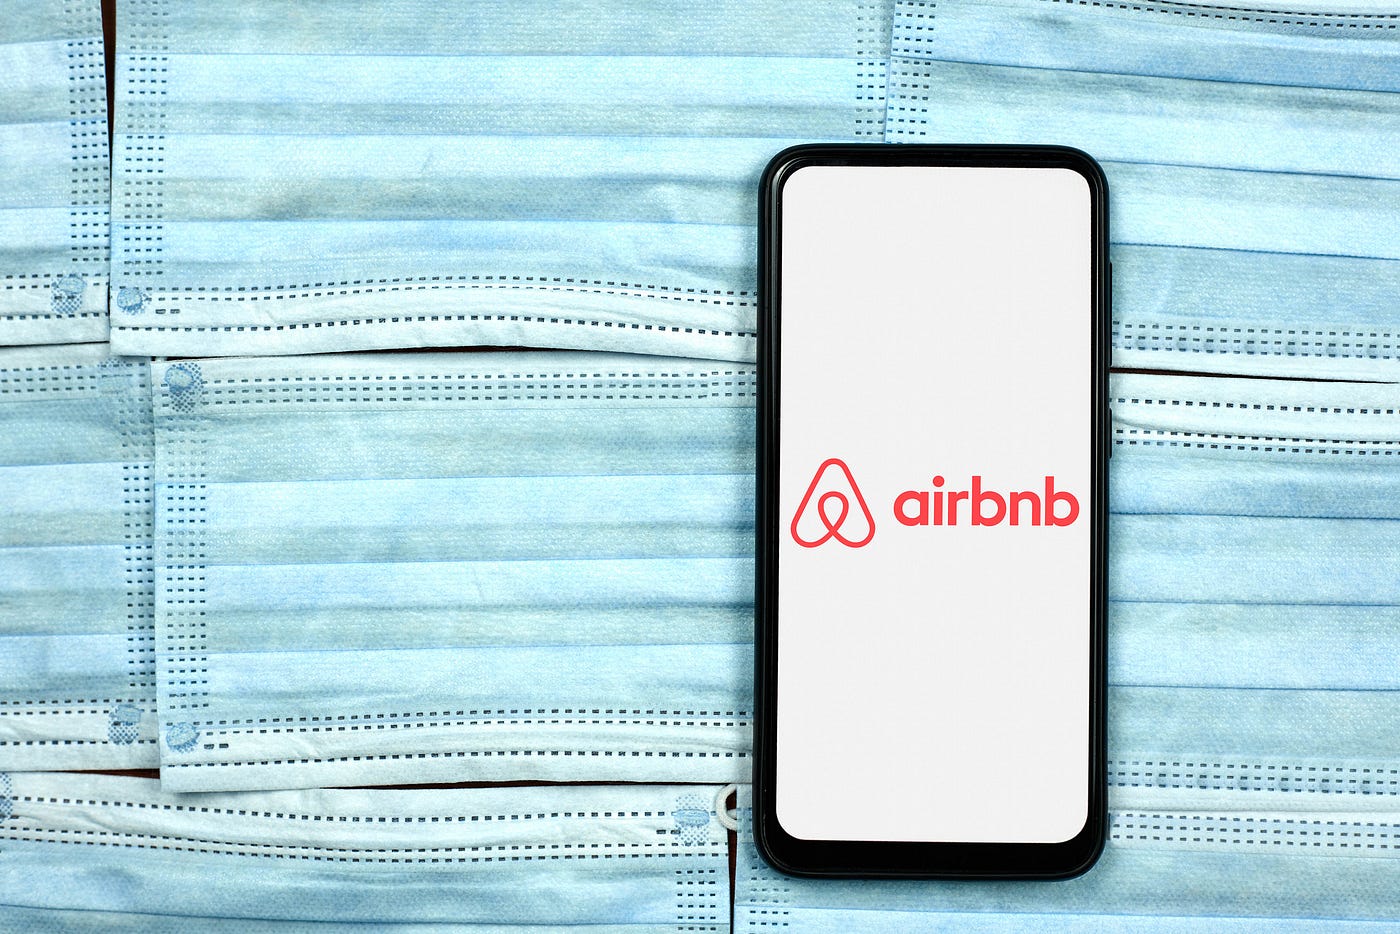 The carbon footprint of Airbnb is likely bigger than you think